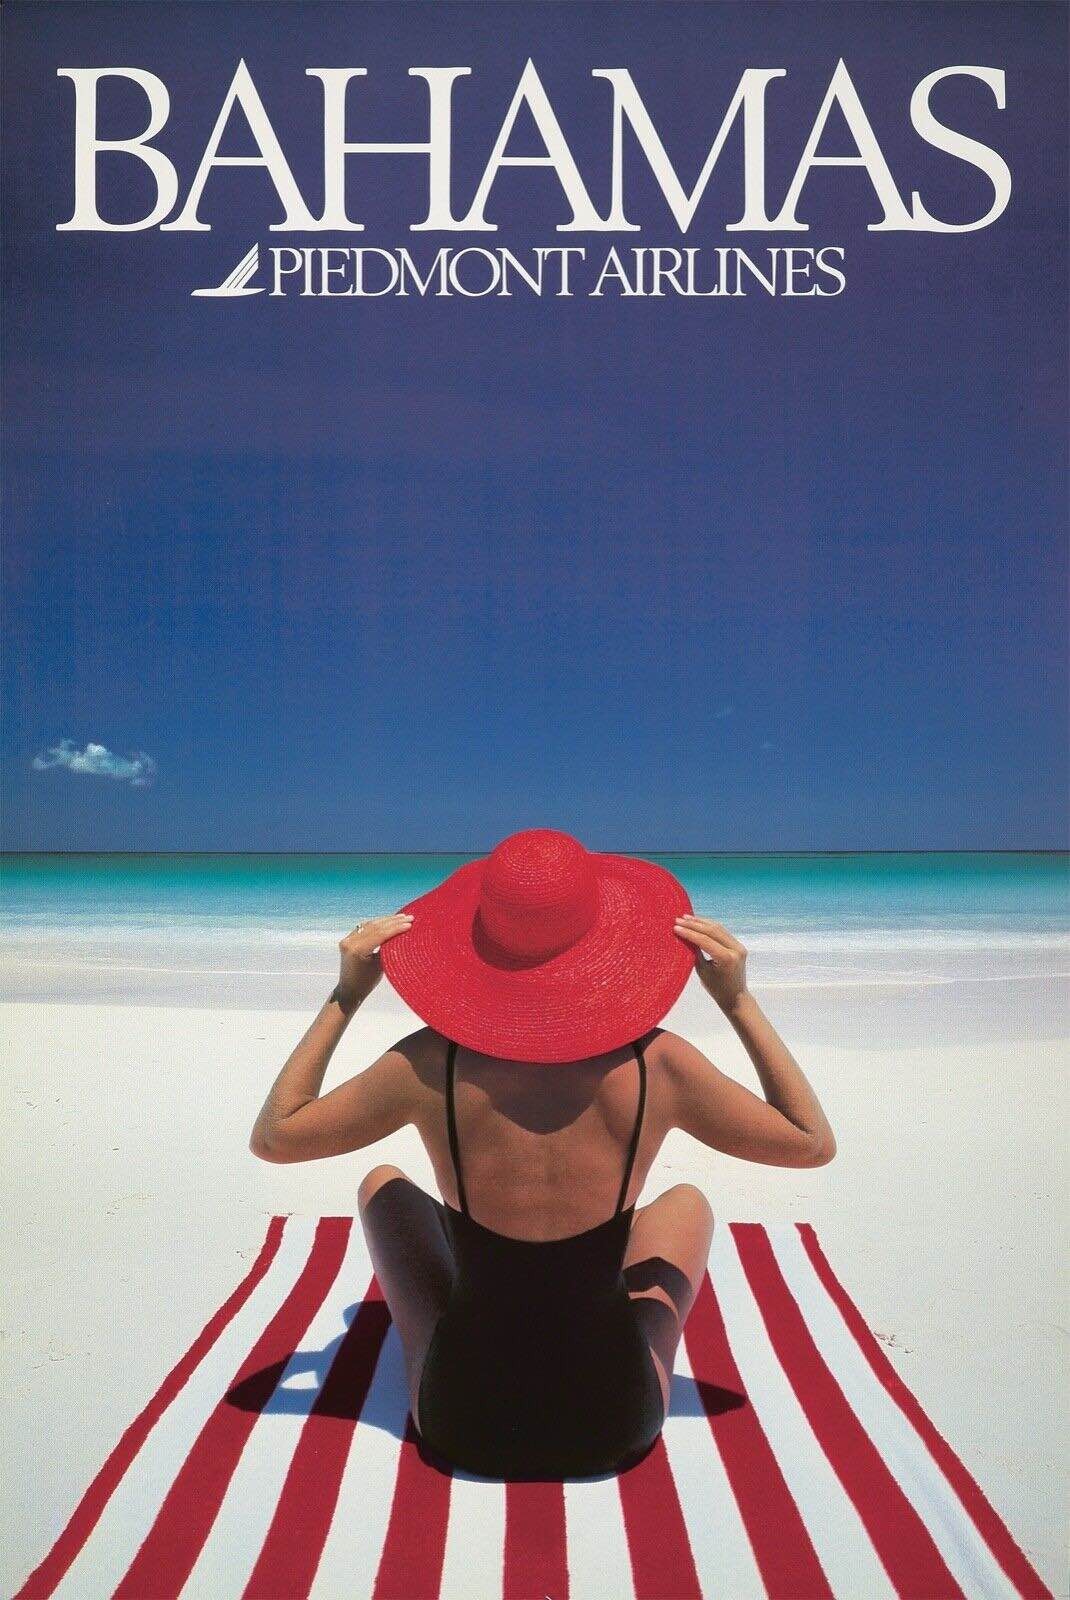 Piedmont Airlines Bahamas (1988)